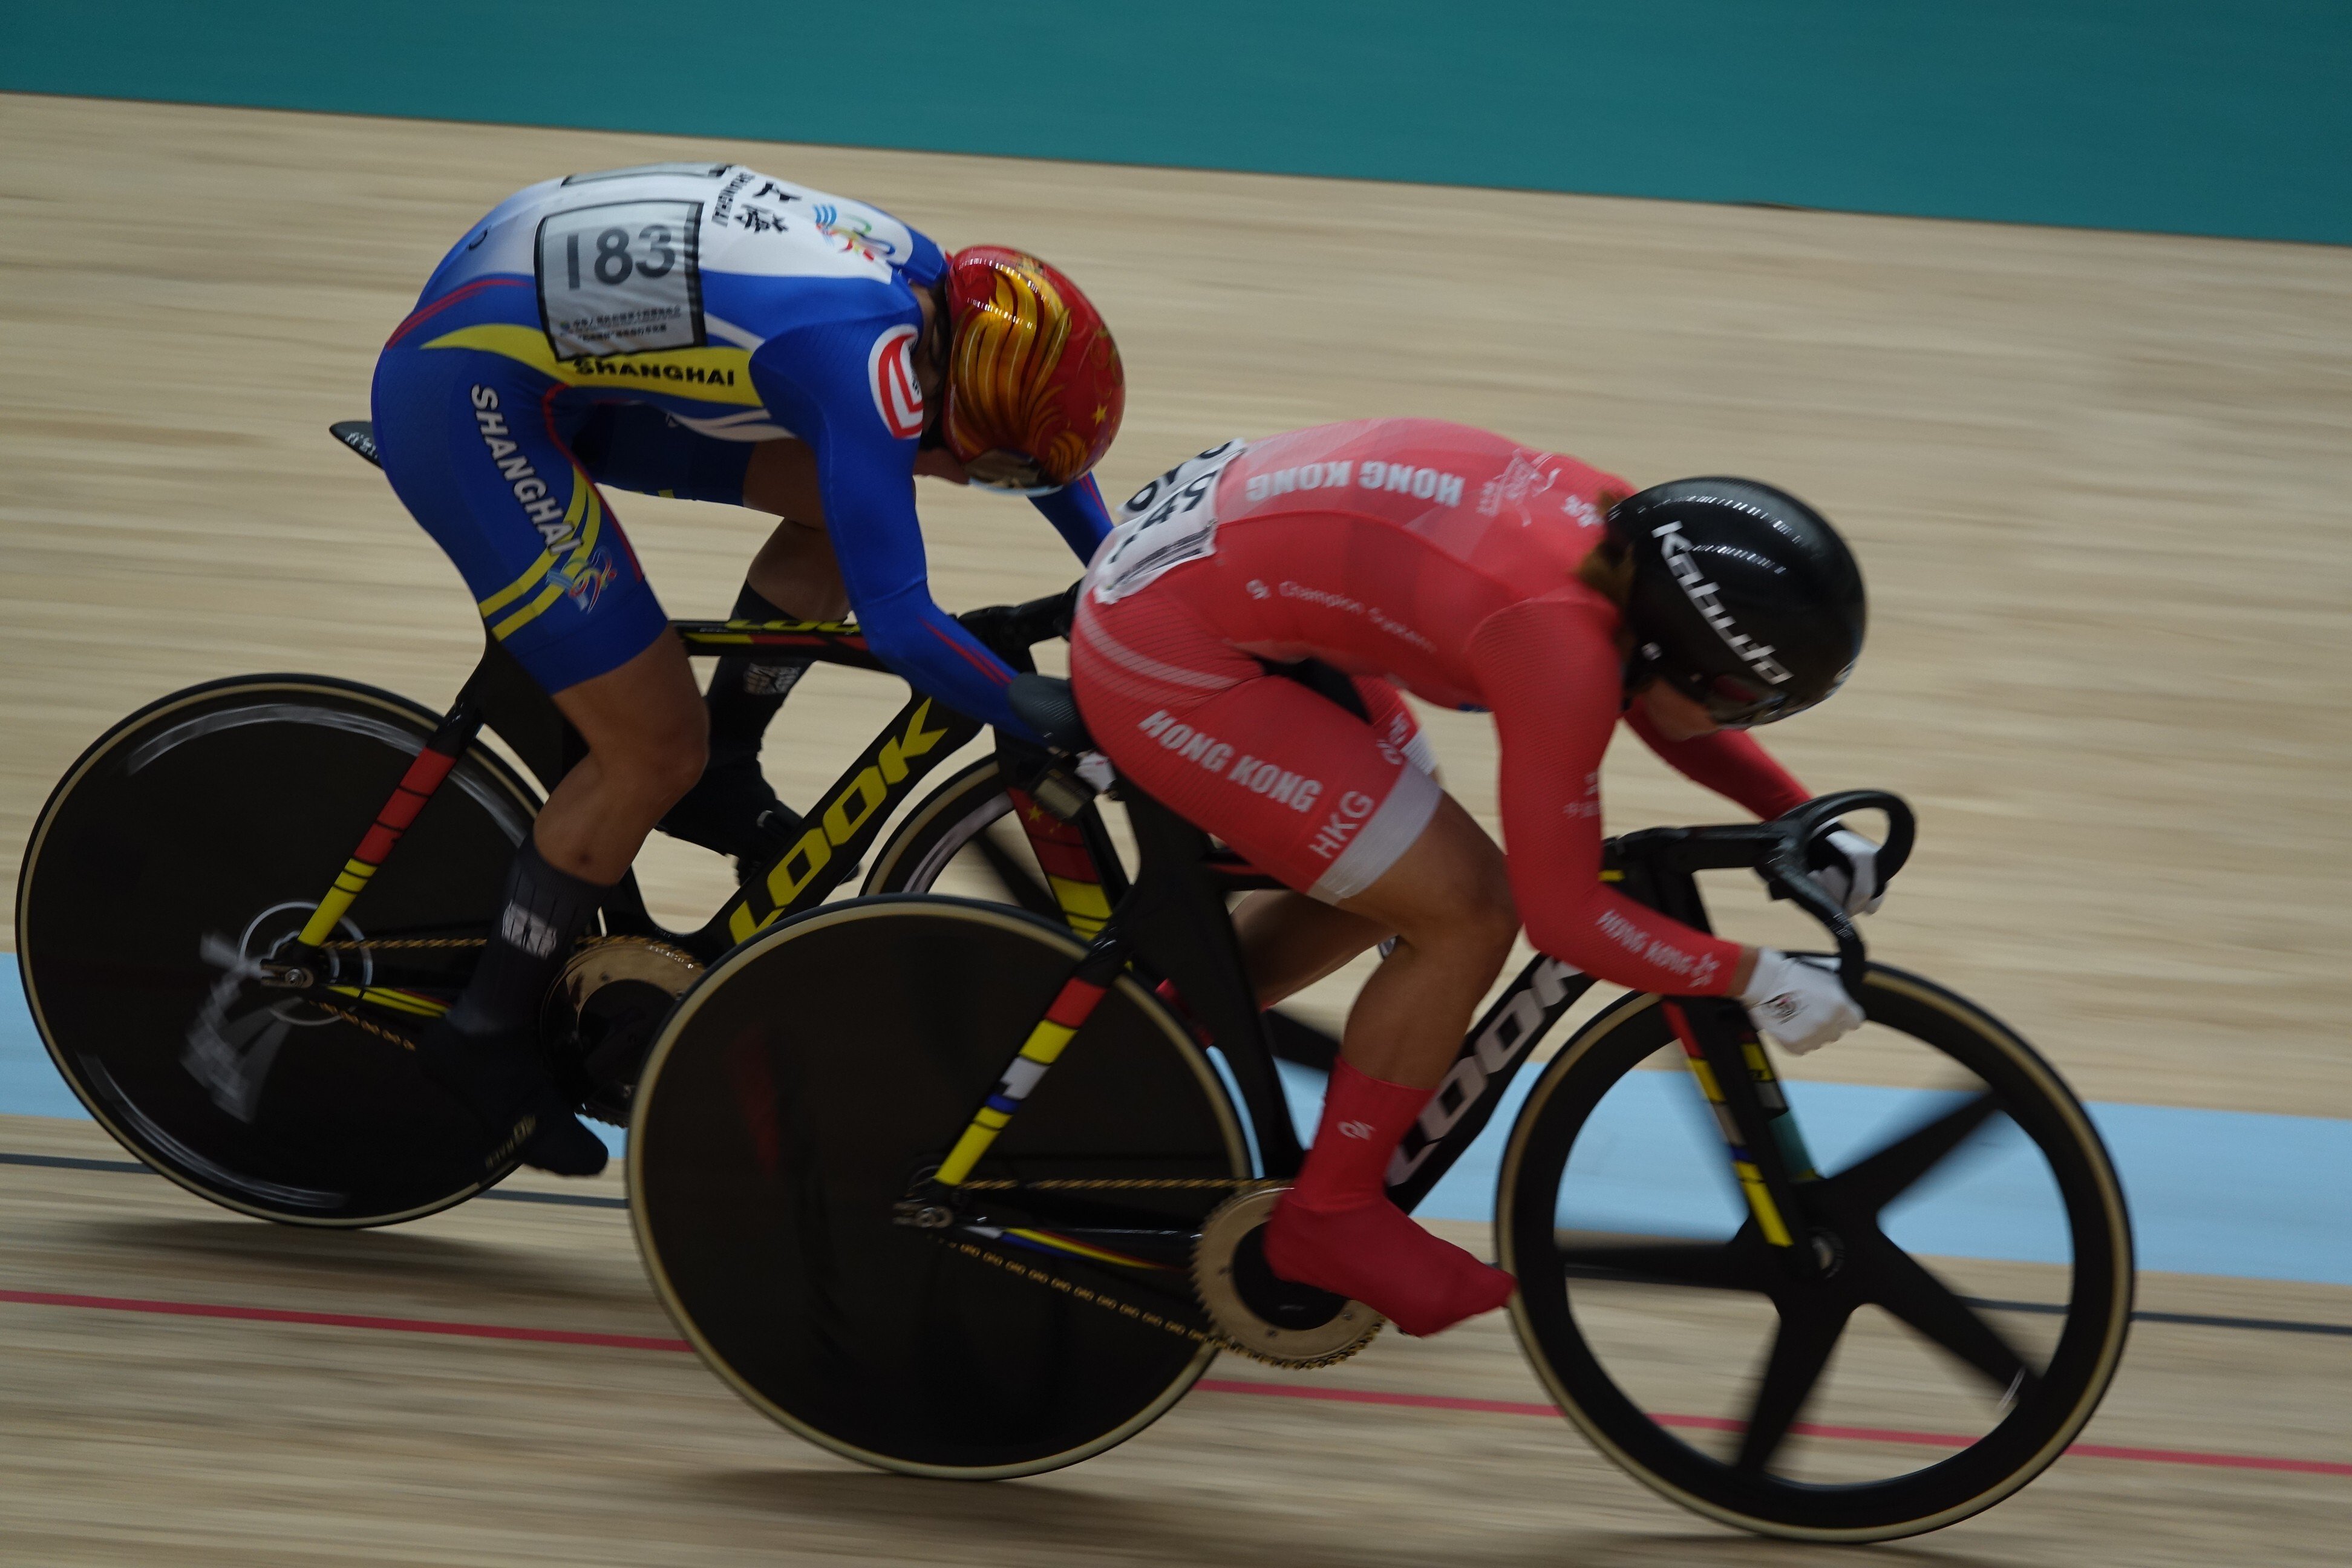 Sarah Lee (in red) and Zhong Tianshi of Shanghai in the sprint final when Lee won both races in the best-of-three tie for the gold medal. Photo: Cycling Association